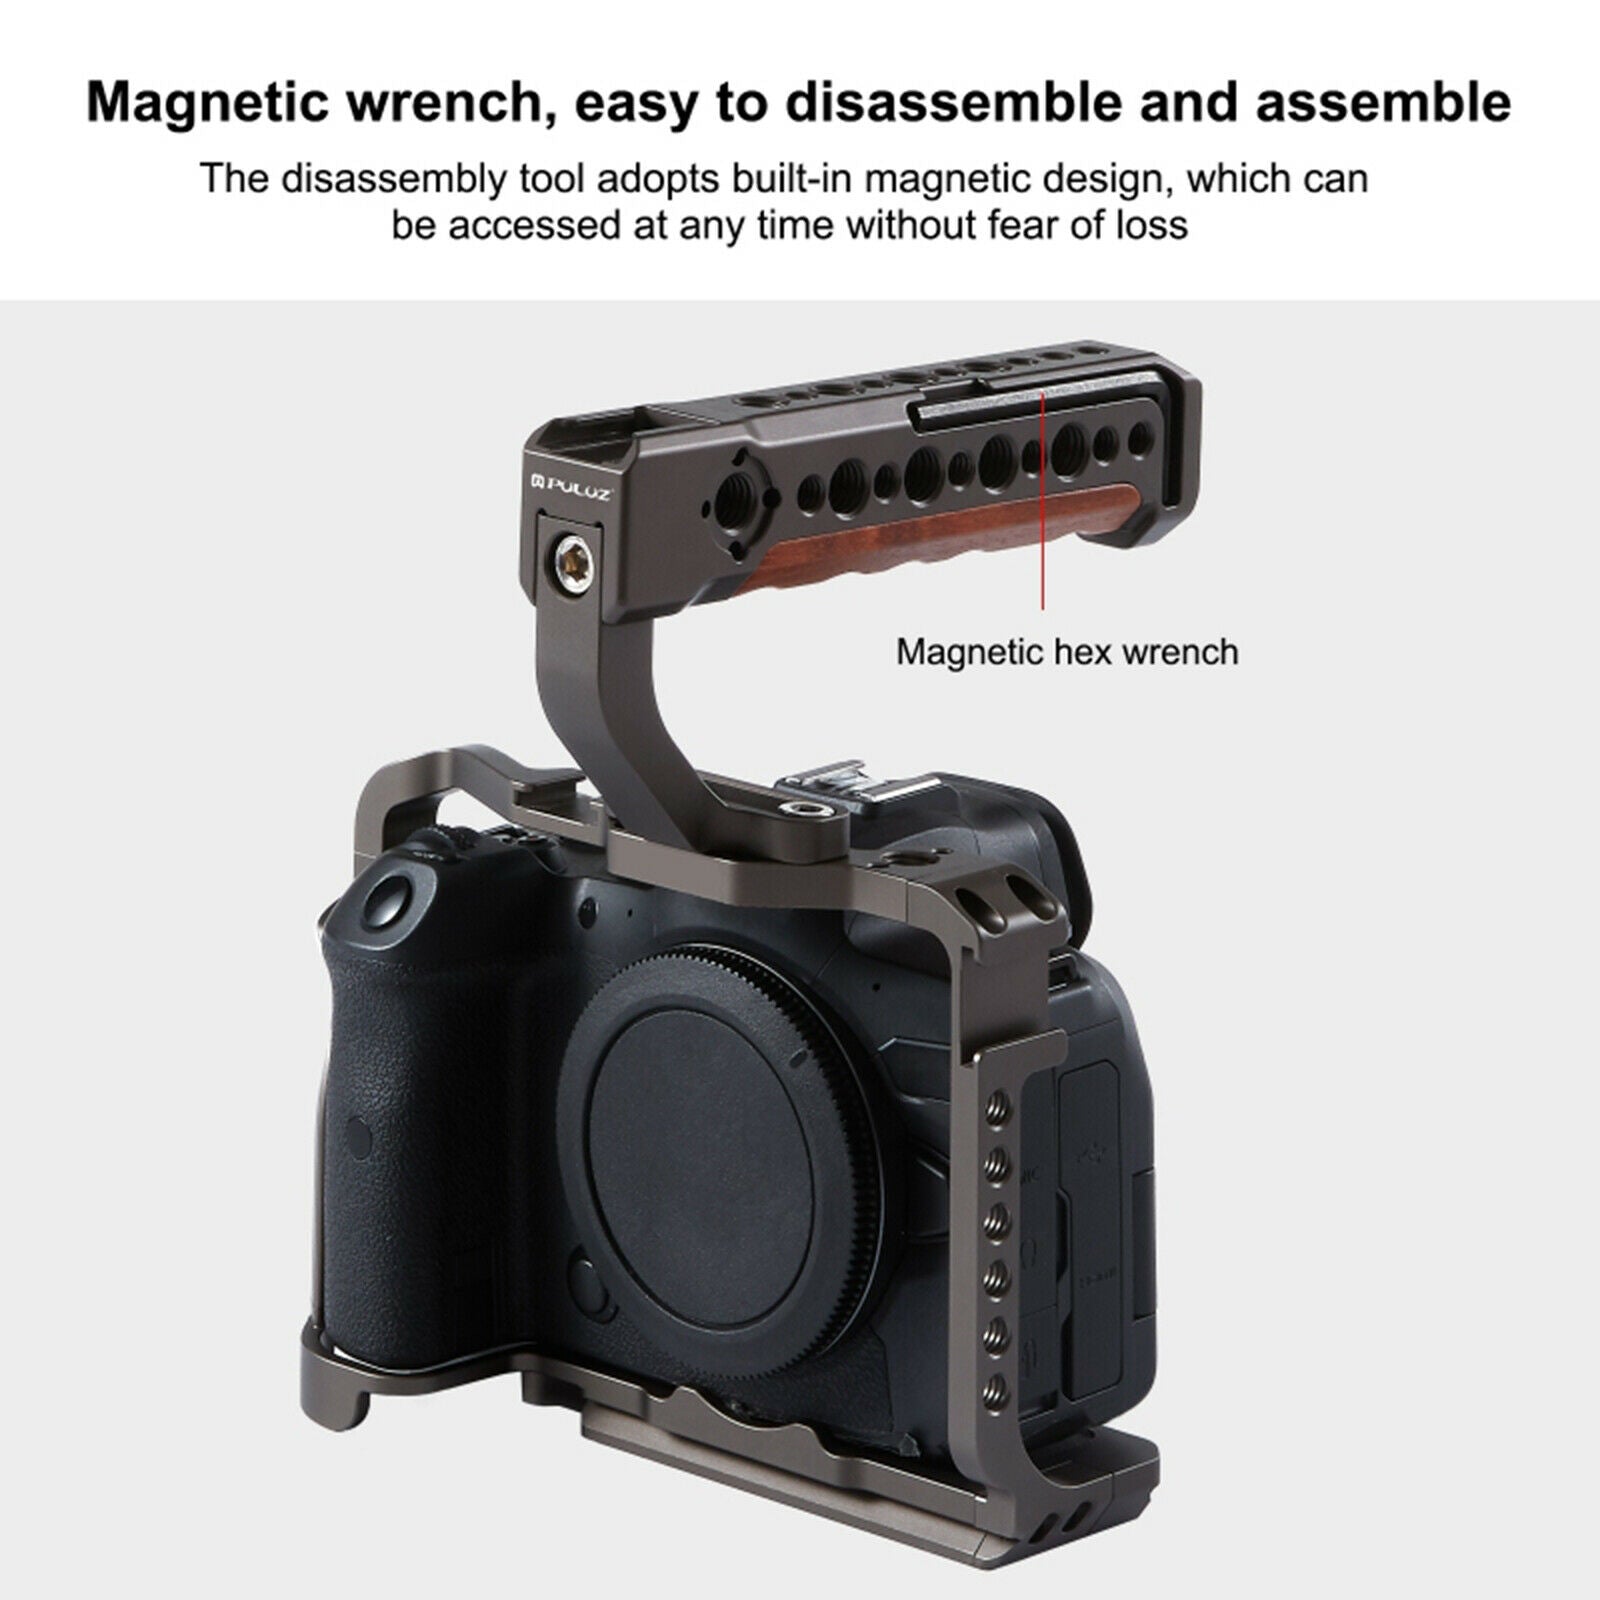 Top Handle DSLR Camera Top Handle for Mirrorless Camera Cage Stabilizer.